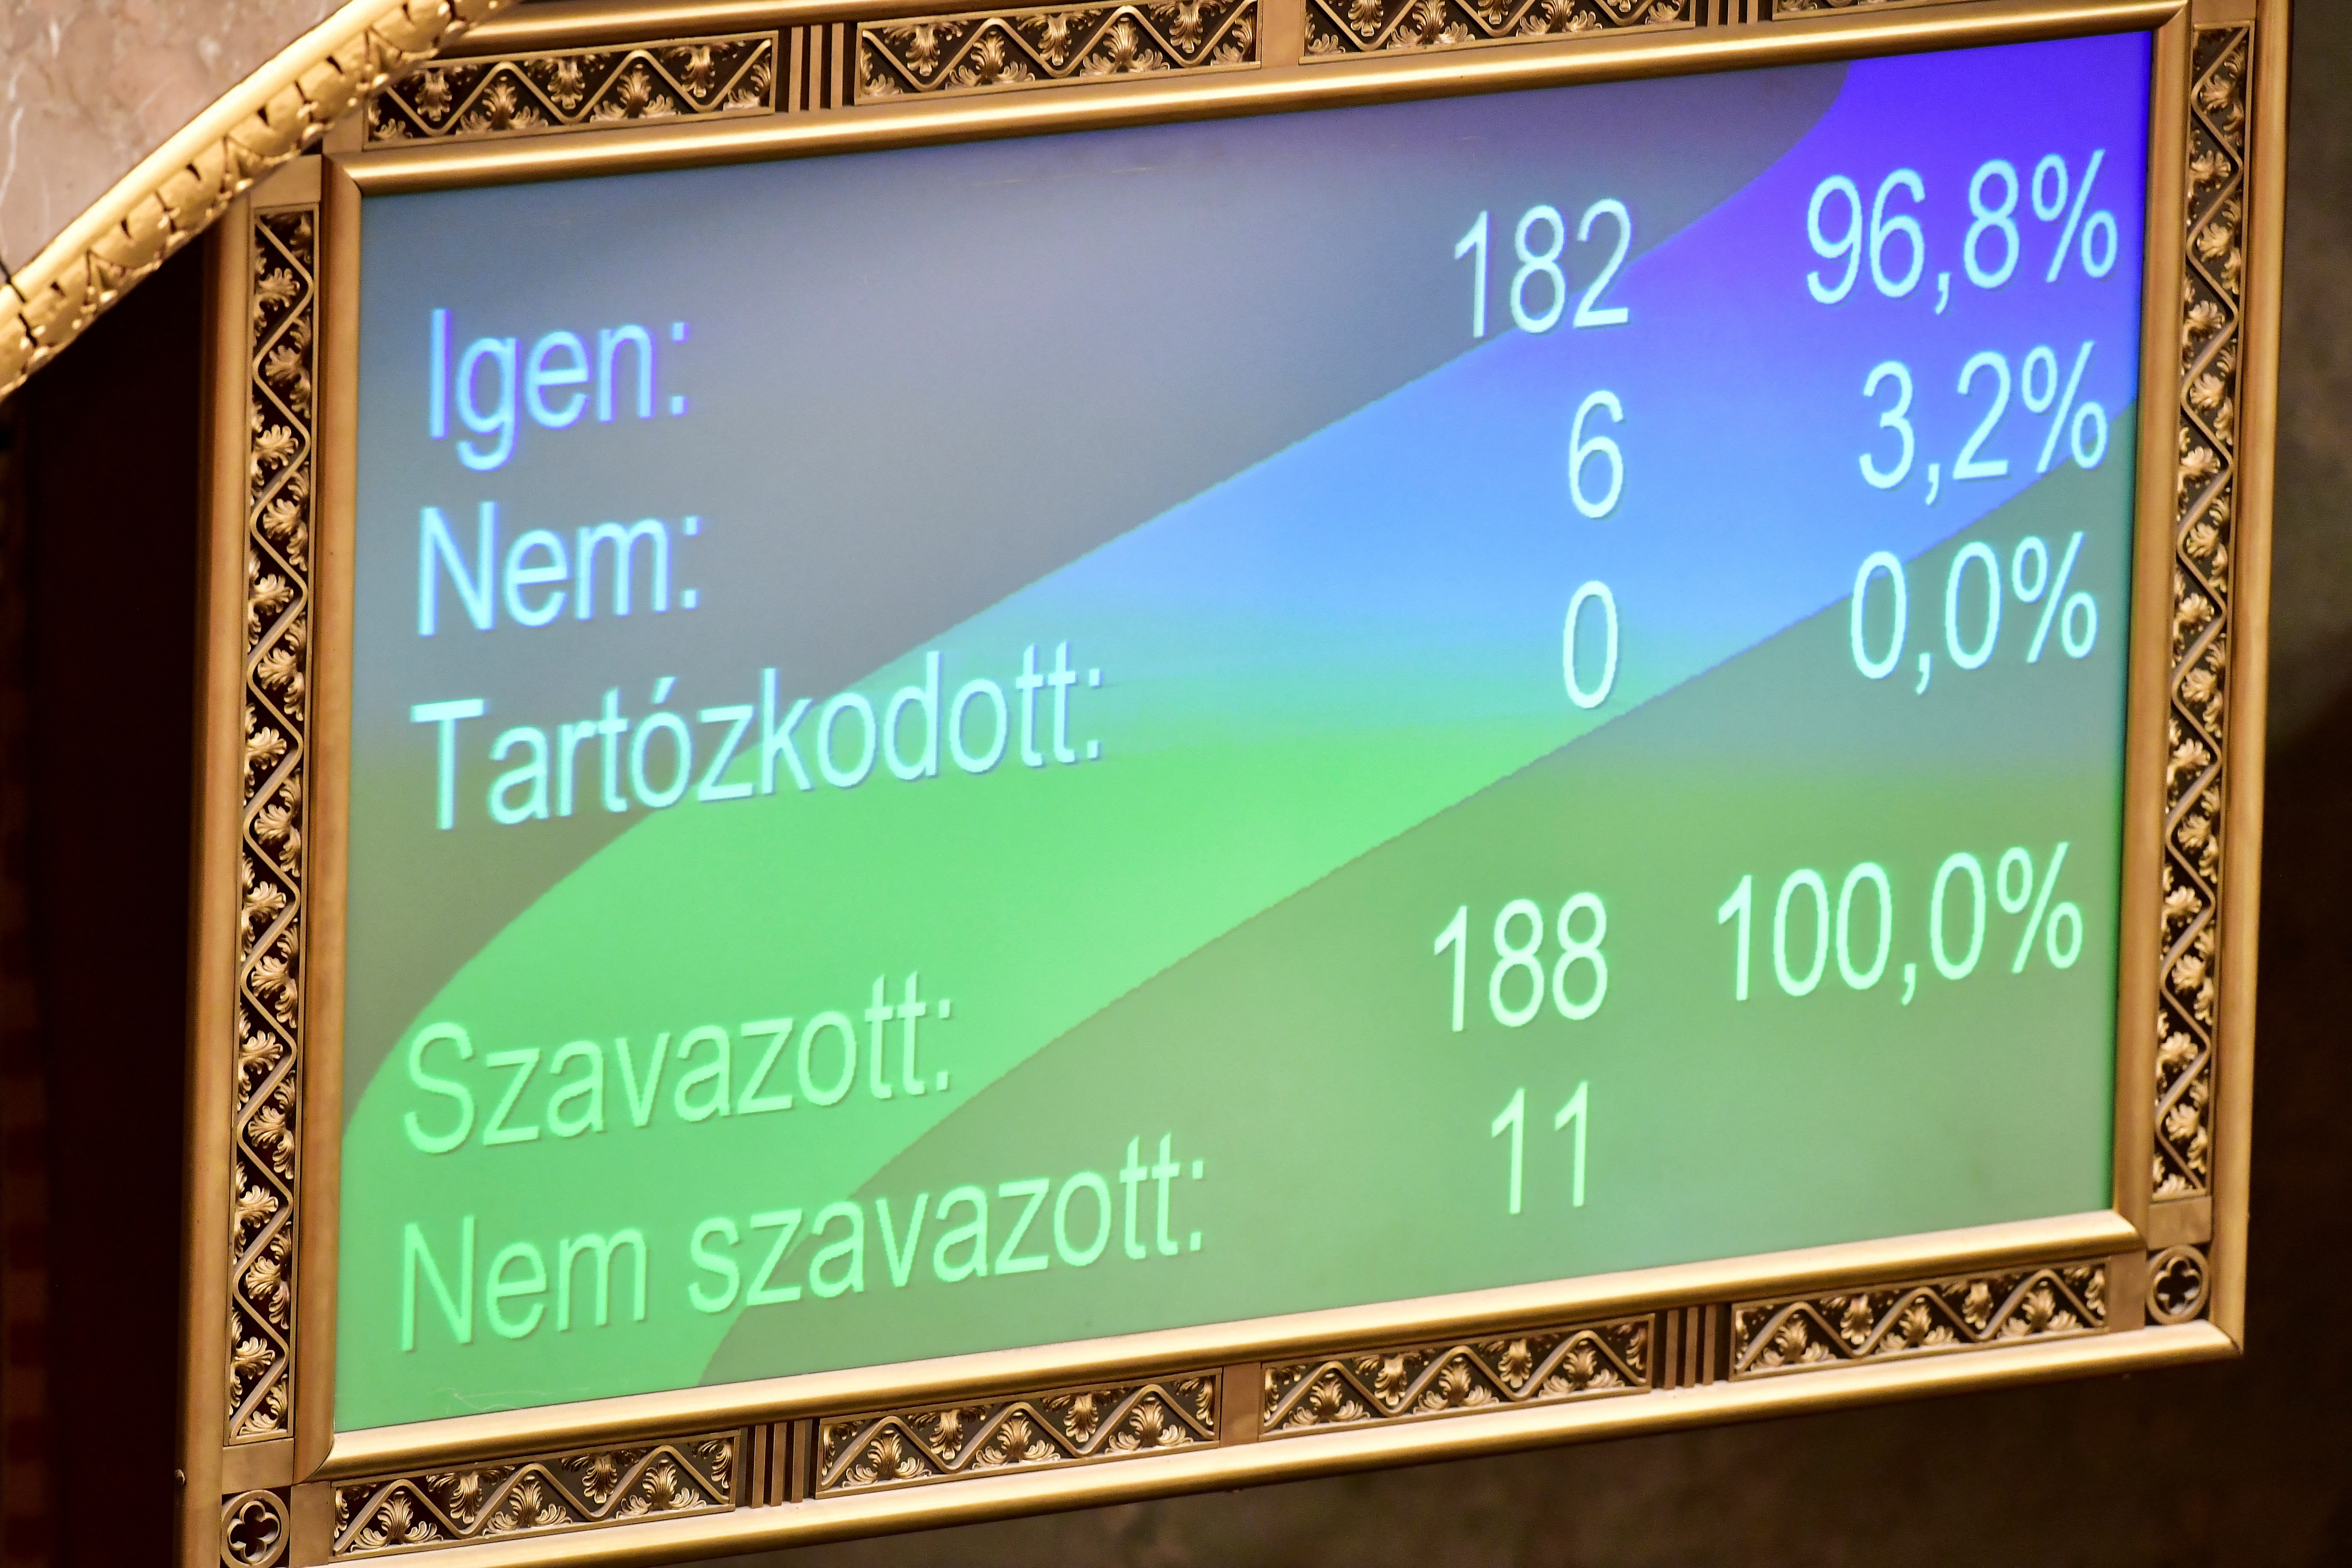 Hungary's parliament votes on the ratification process of Finland's NATO entry